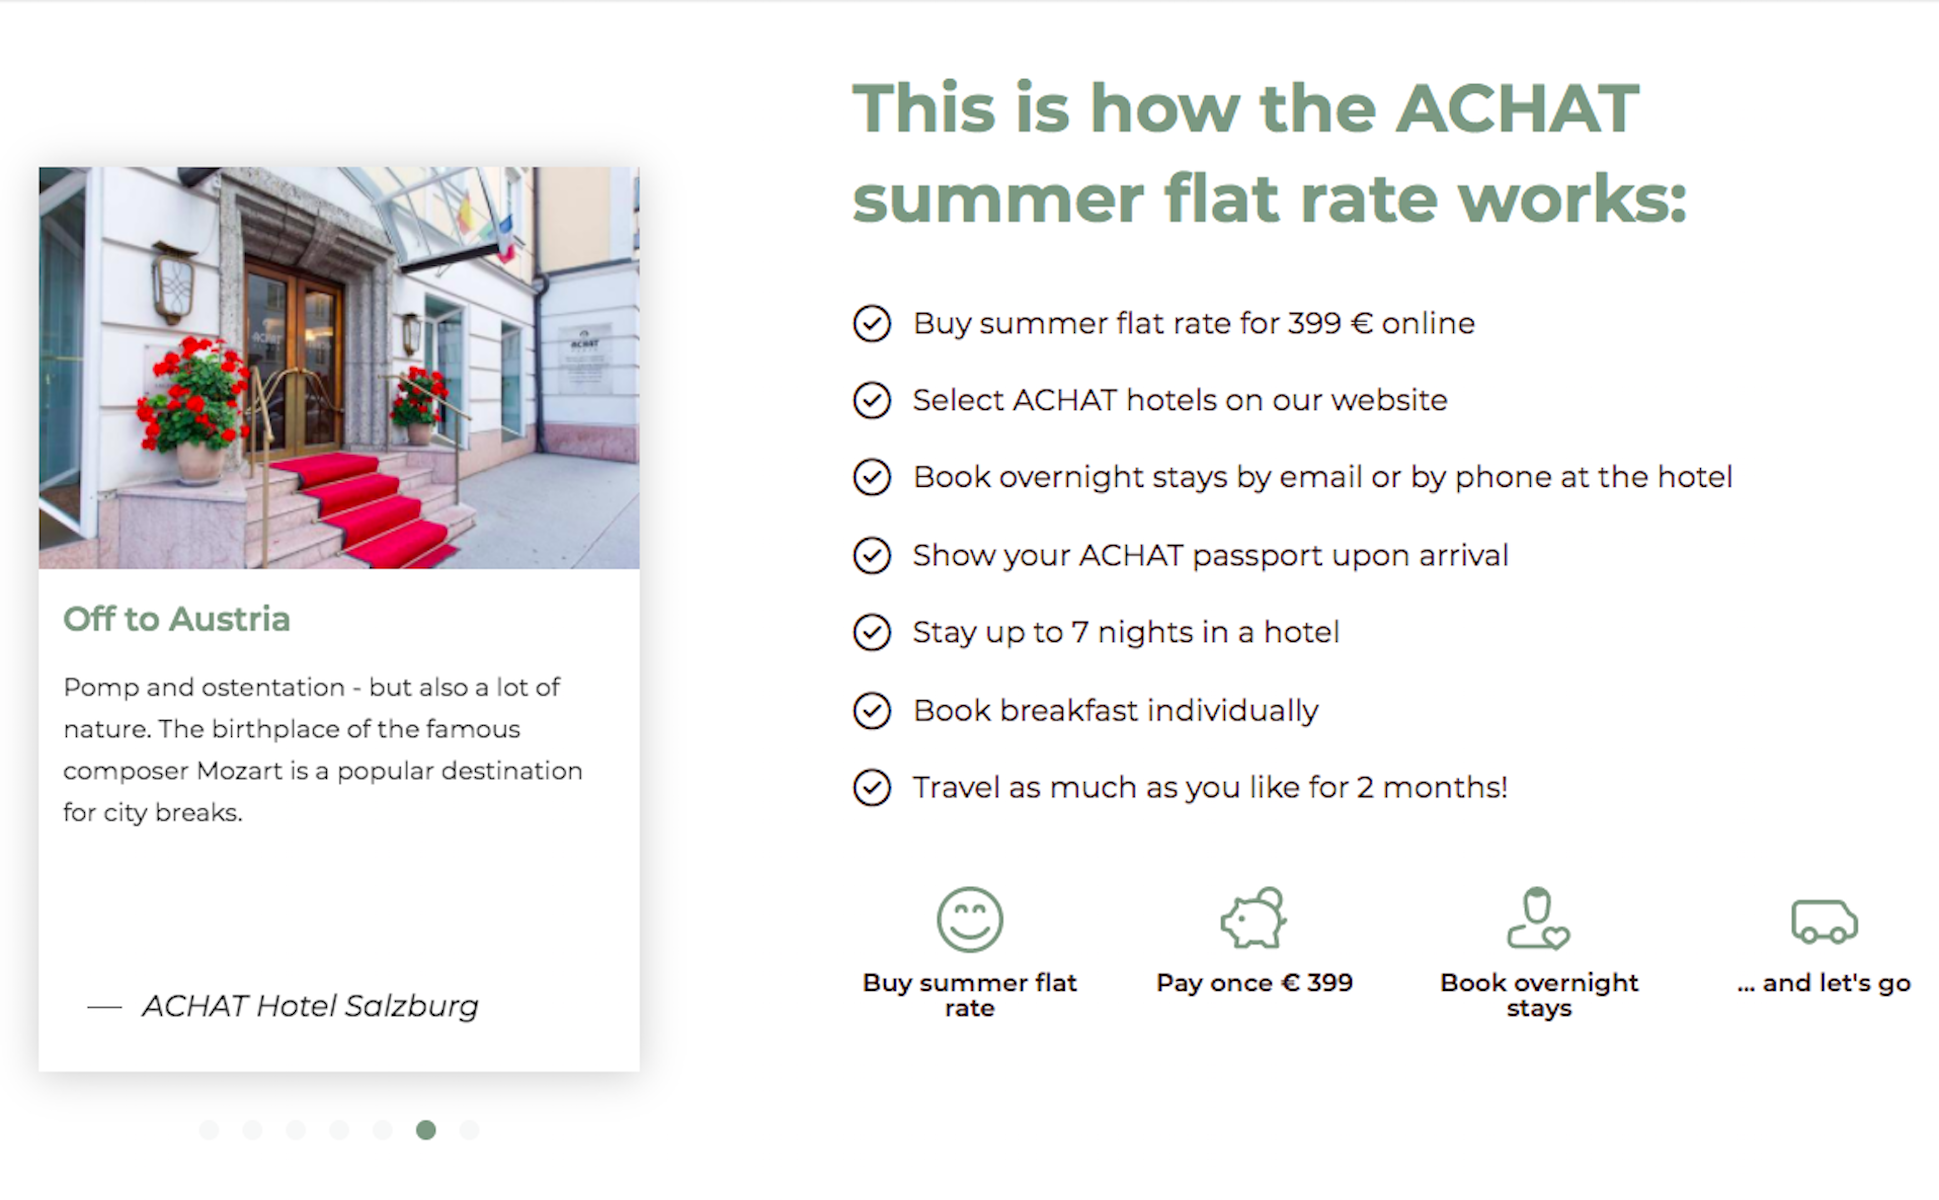 ACHAT summer flat rate deal for hotel stays in Europe